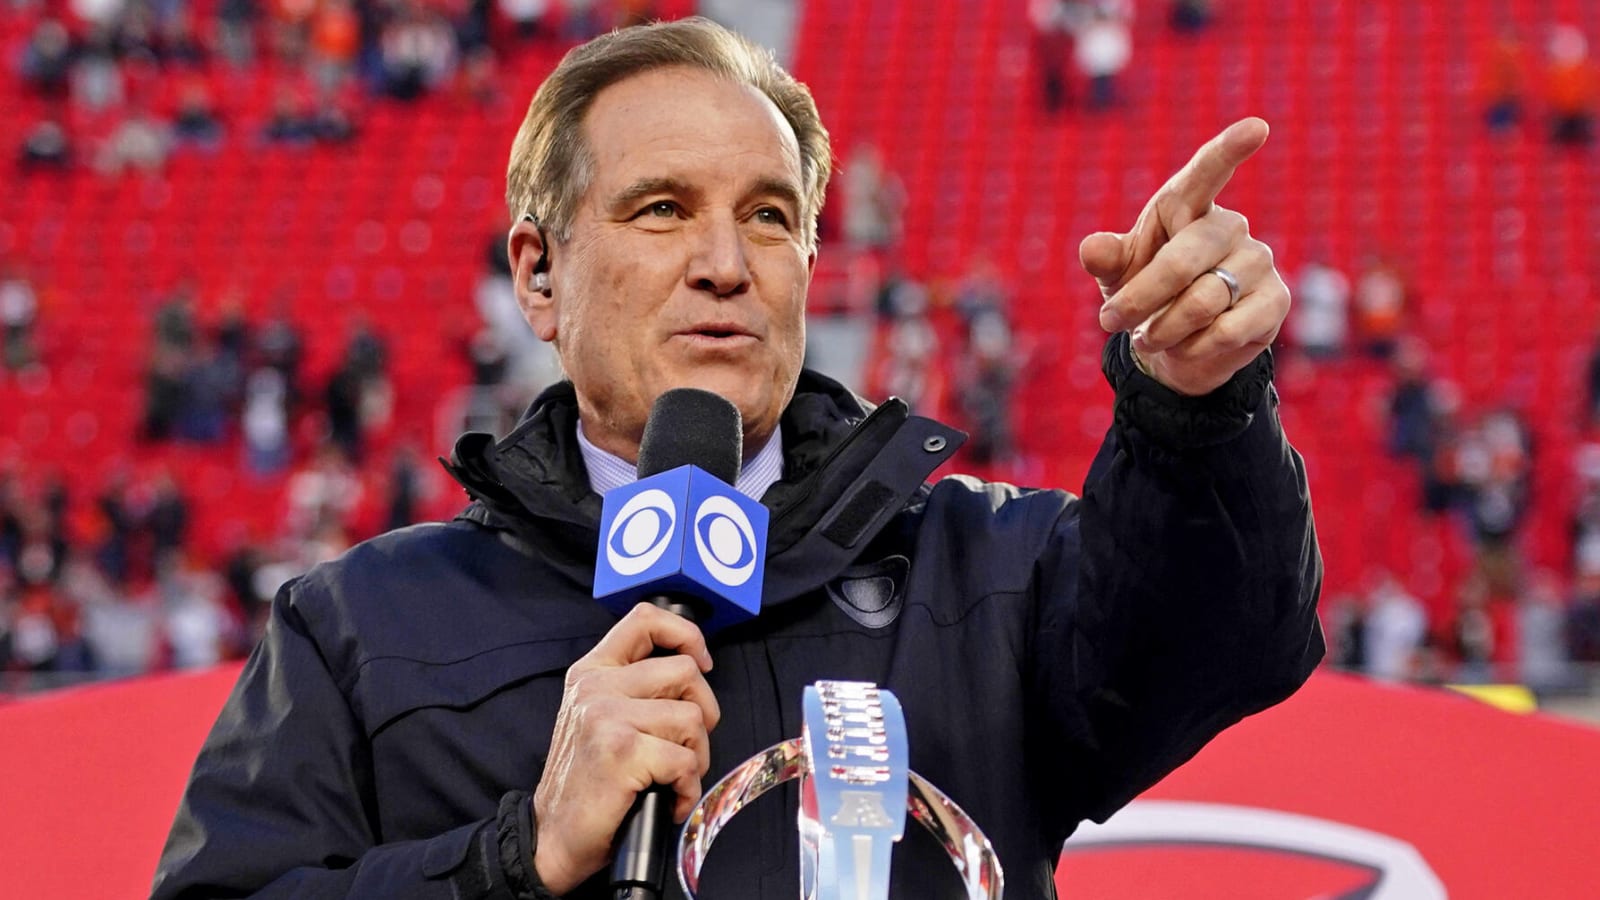 Jim Nantz goes viral for his Christmas sweater during Rams-Broncos game